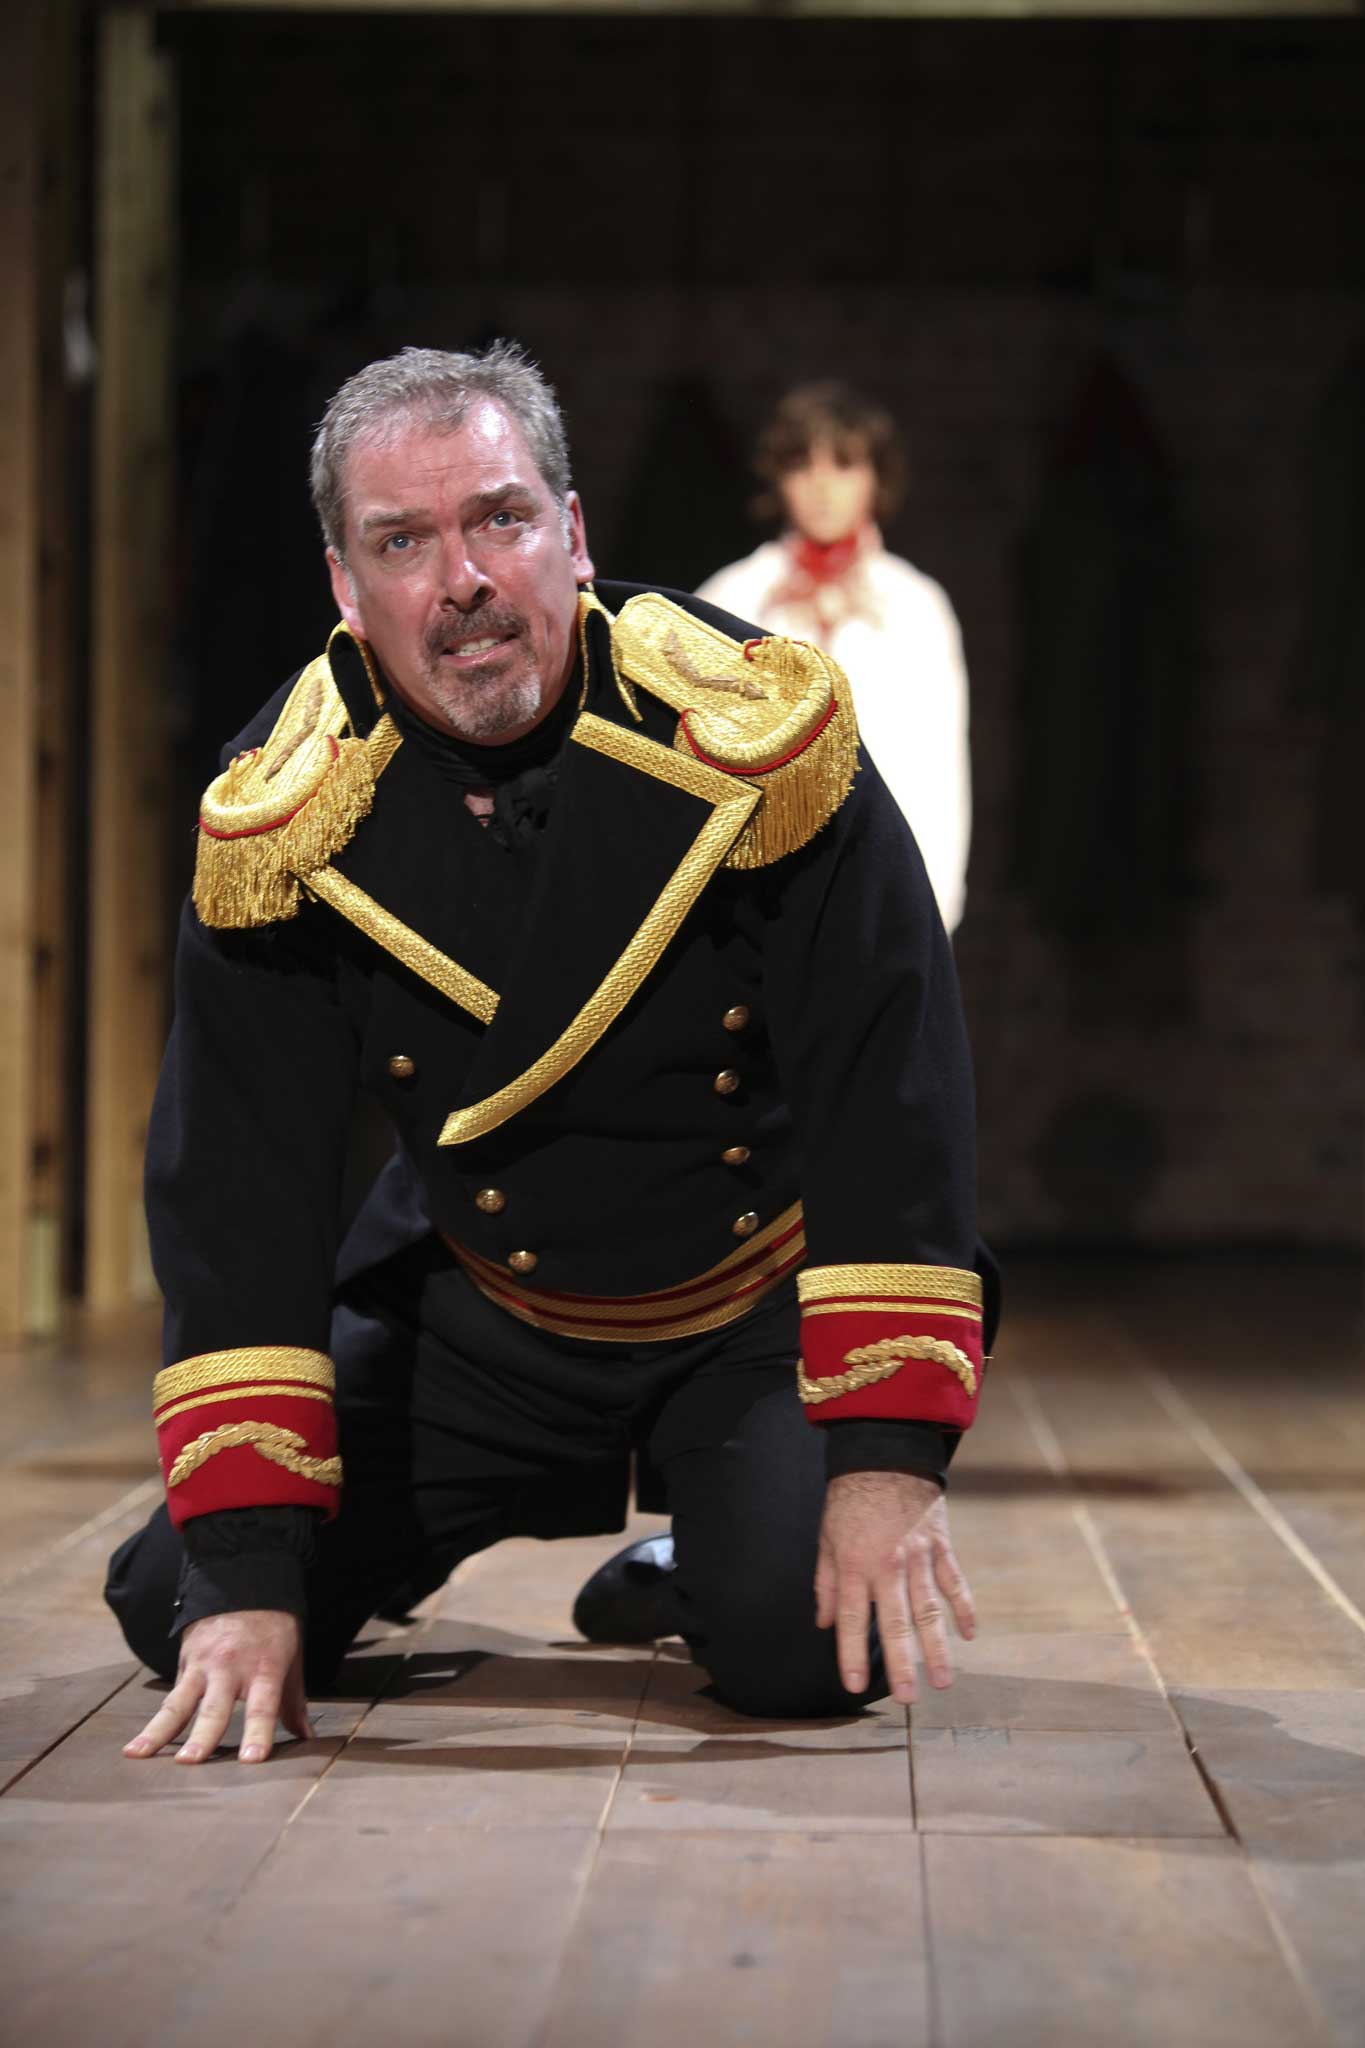 Crackling with topicality: Boris Godunov is a mordant commentary on the instabilities of power